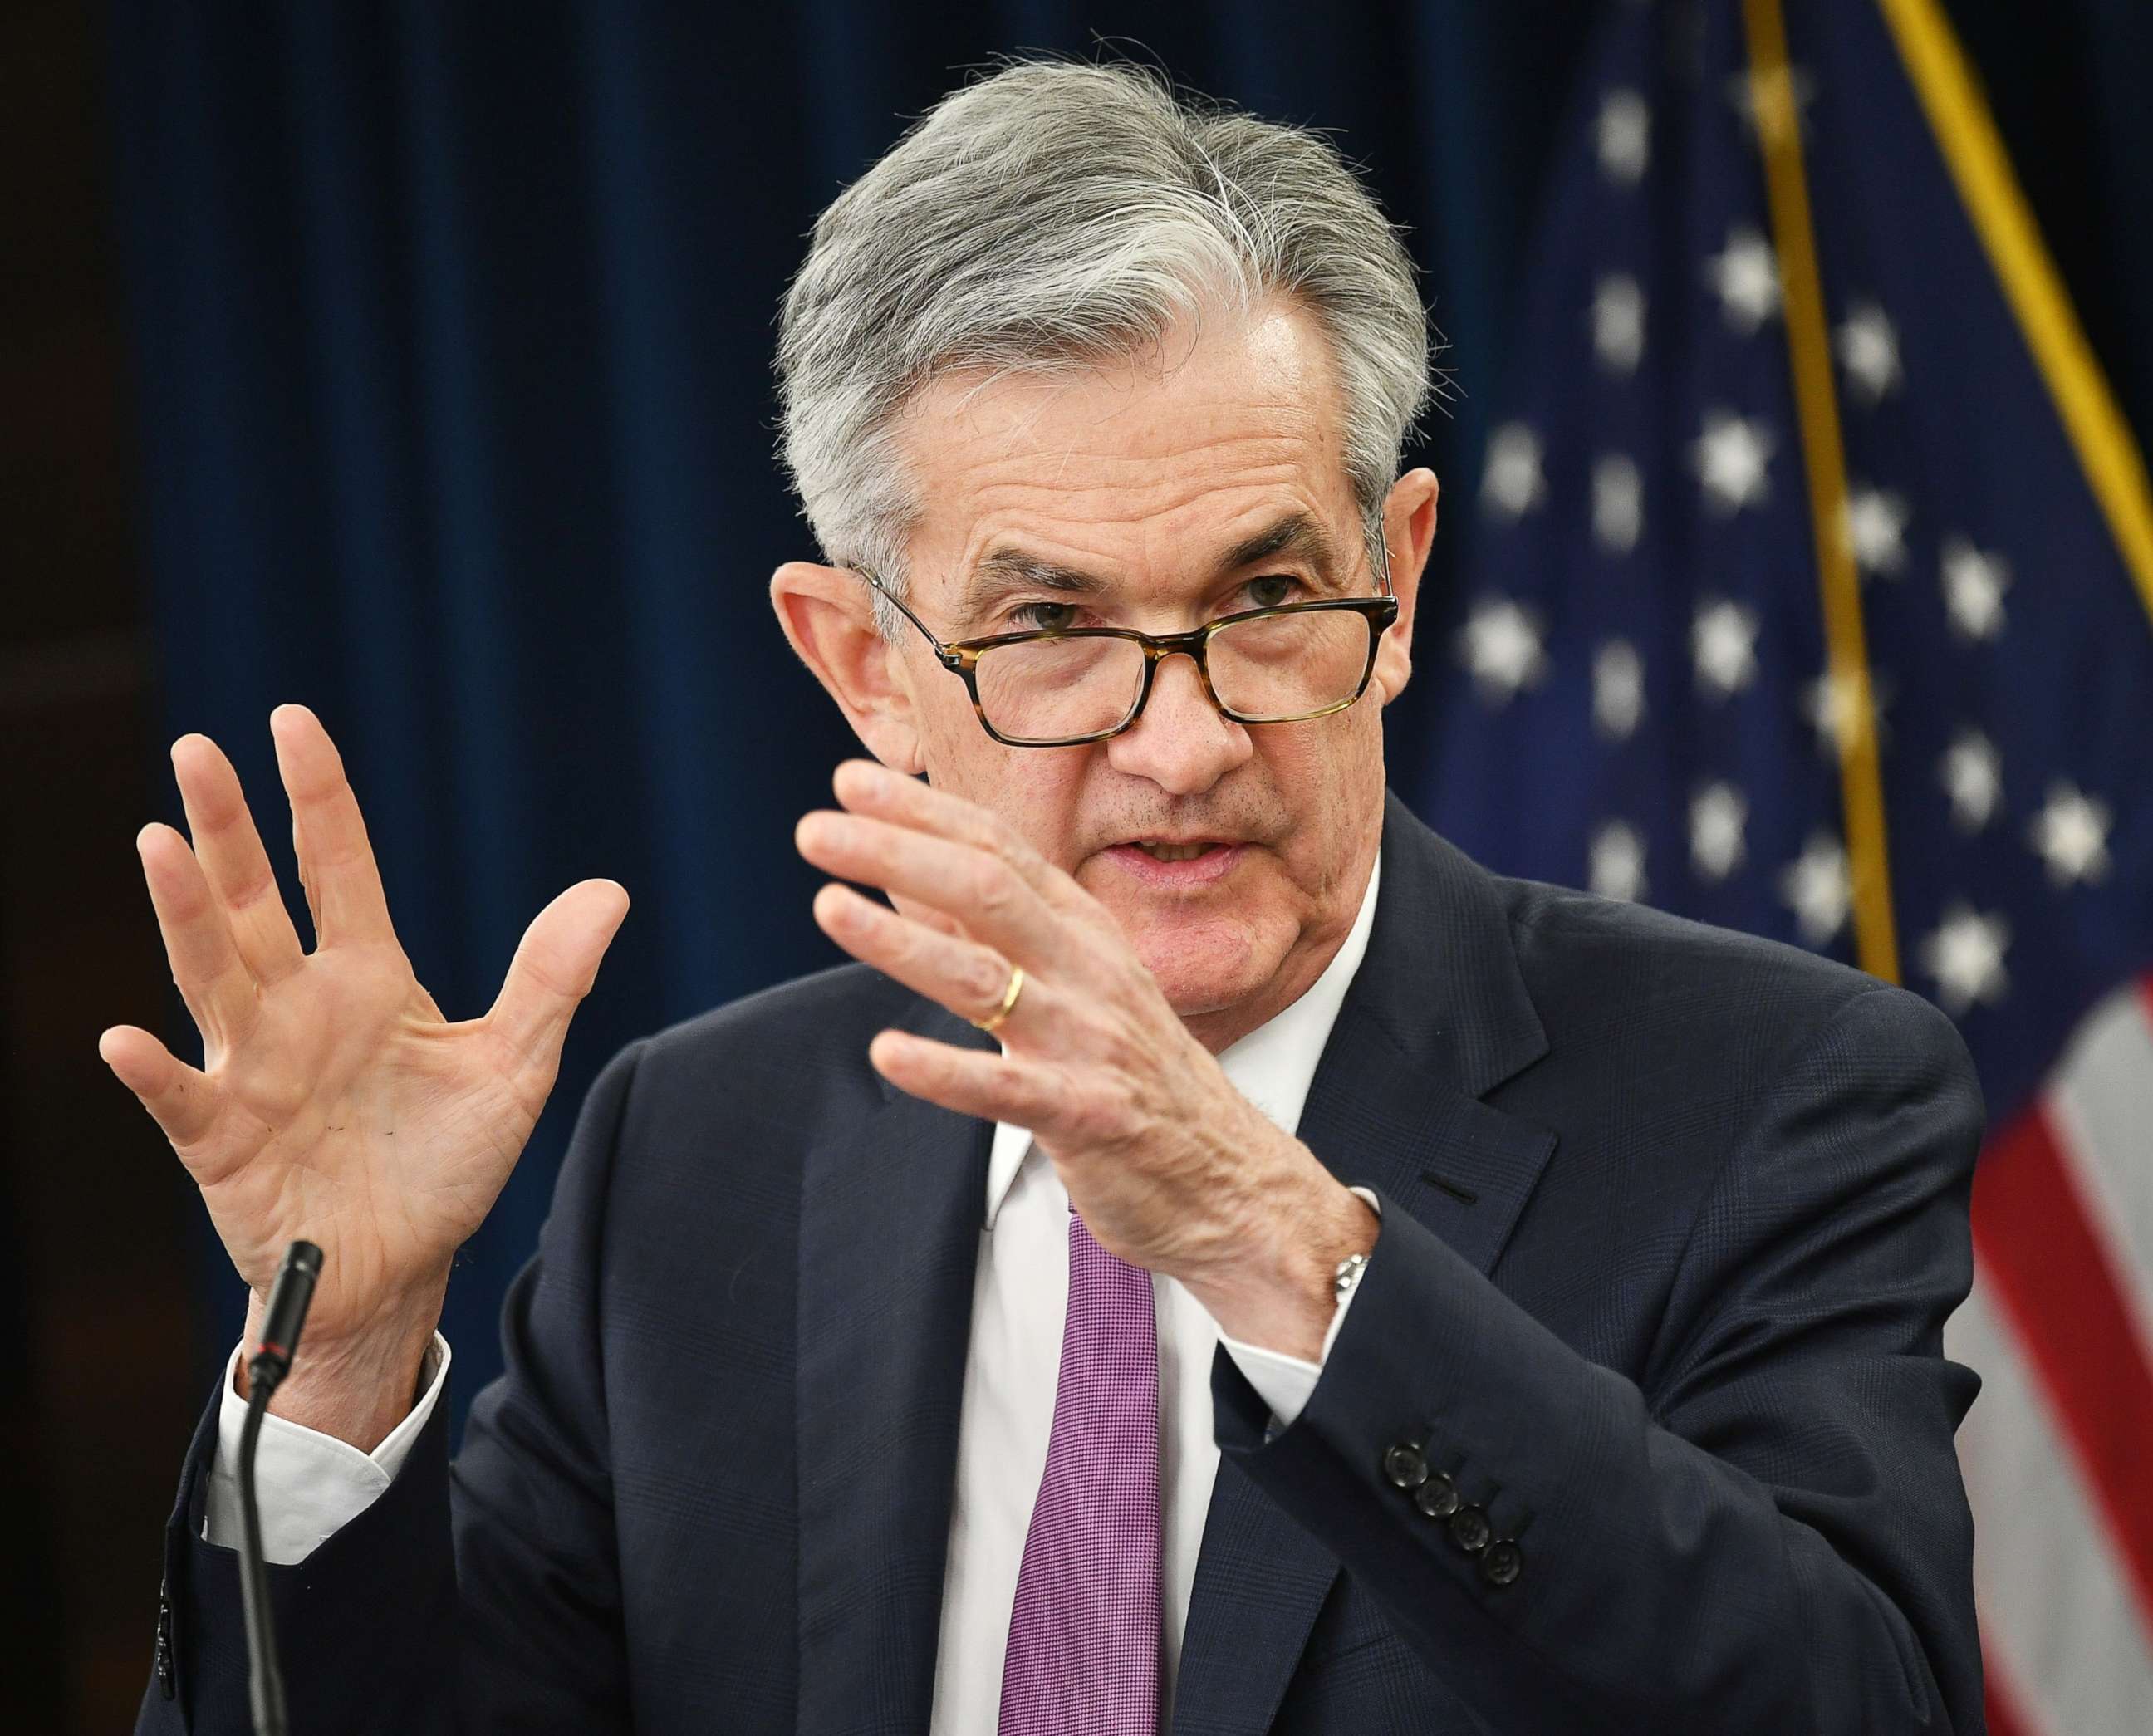 PHOTO: Federal Reserve Board Chair Jerome Powell speaks during a press conference after a Federal Open Market Committee meeting in Washington, May 1, 2019.